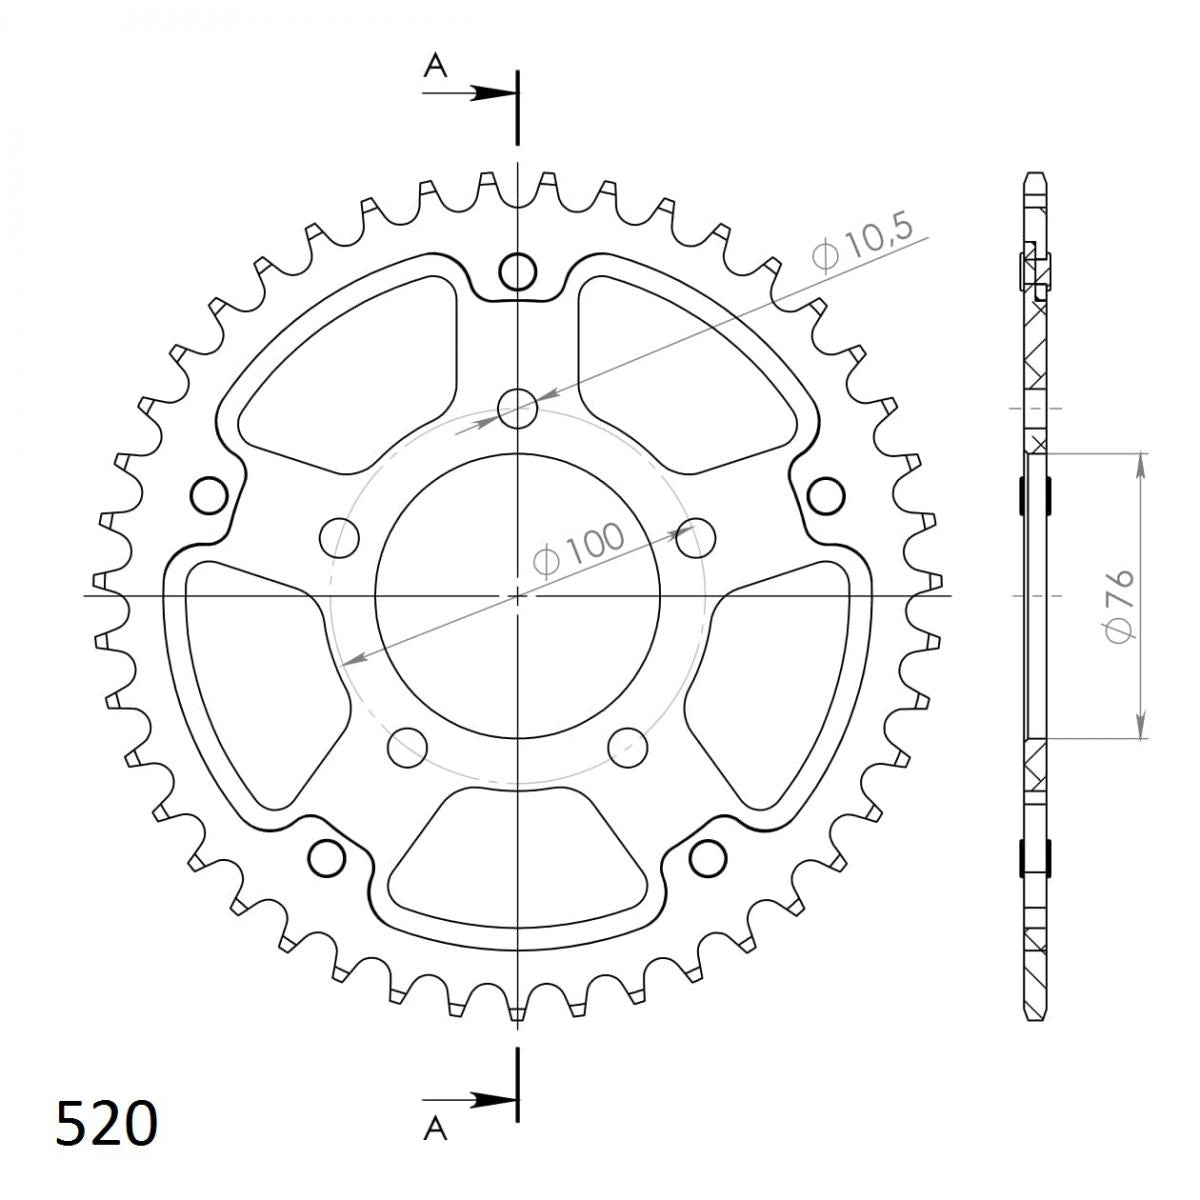 Supersprox Stealth 520 Pitch Rear Sprocket RST-7091:42 - (520, 76mm Centre, 100mm PCD)